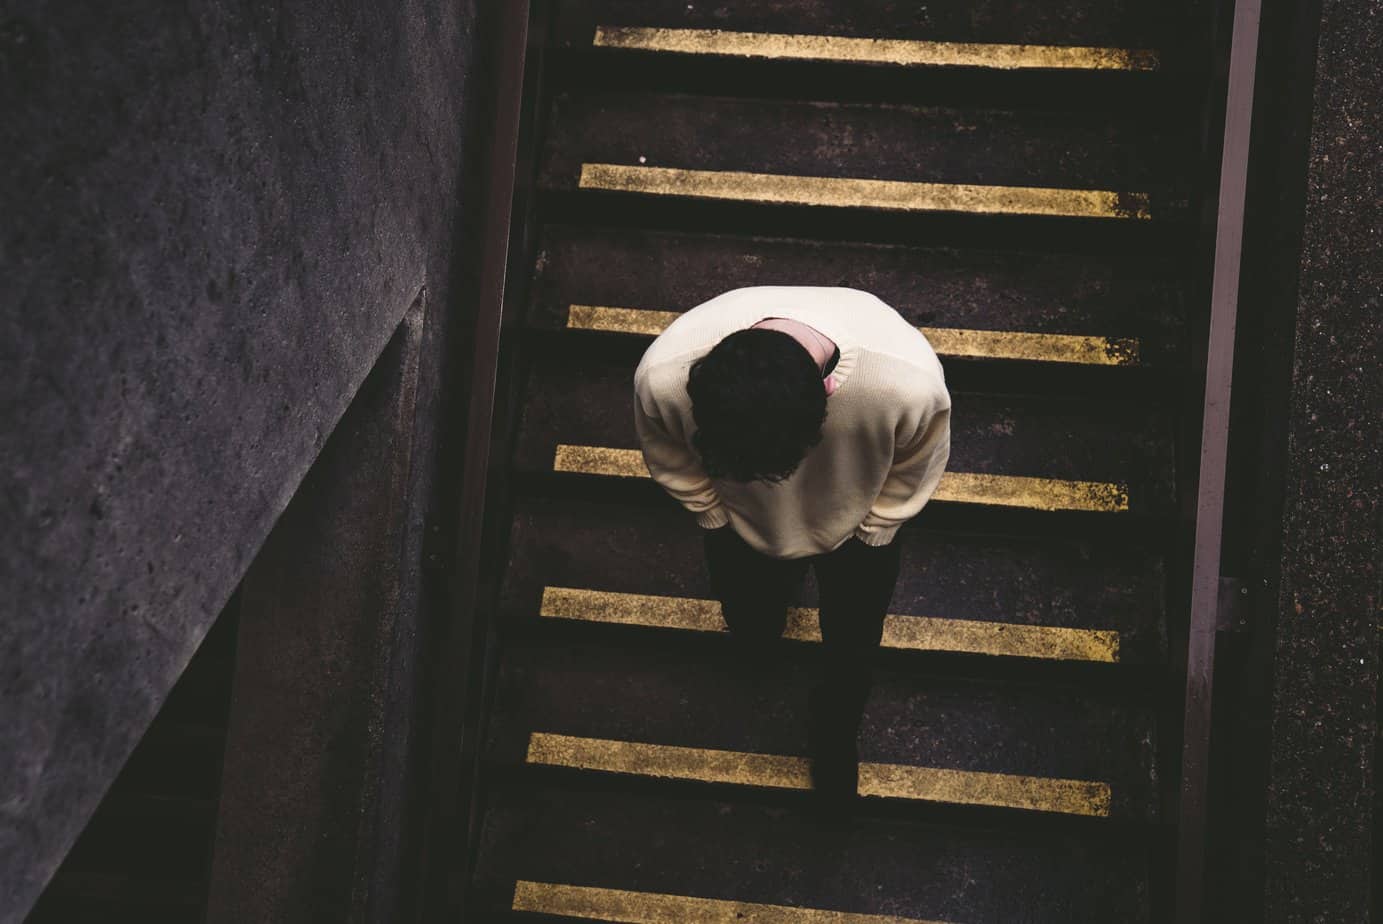 A man walks down a staircase. Dealing with heroin addiction